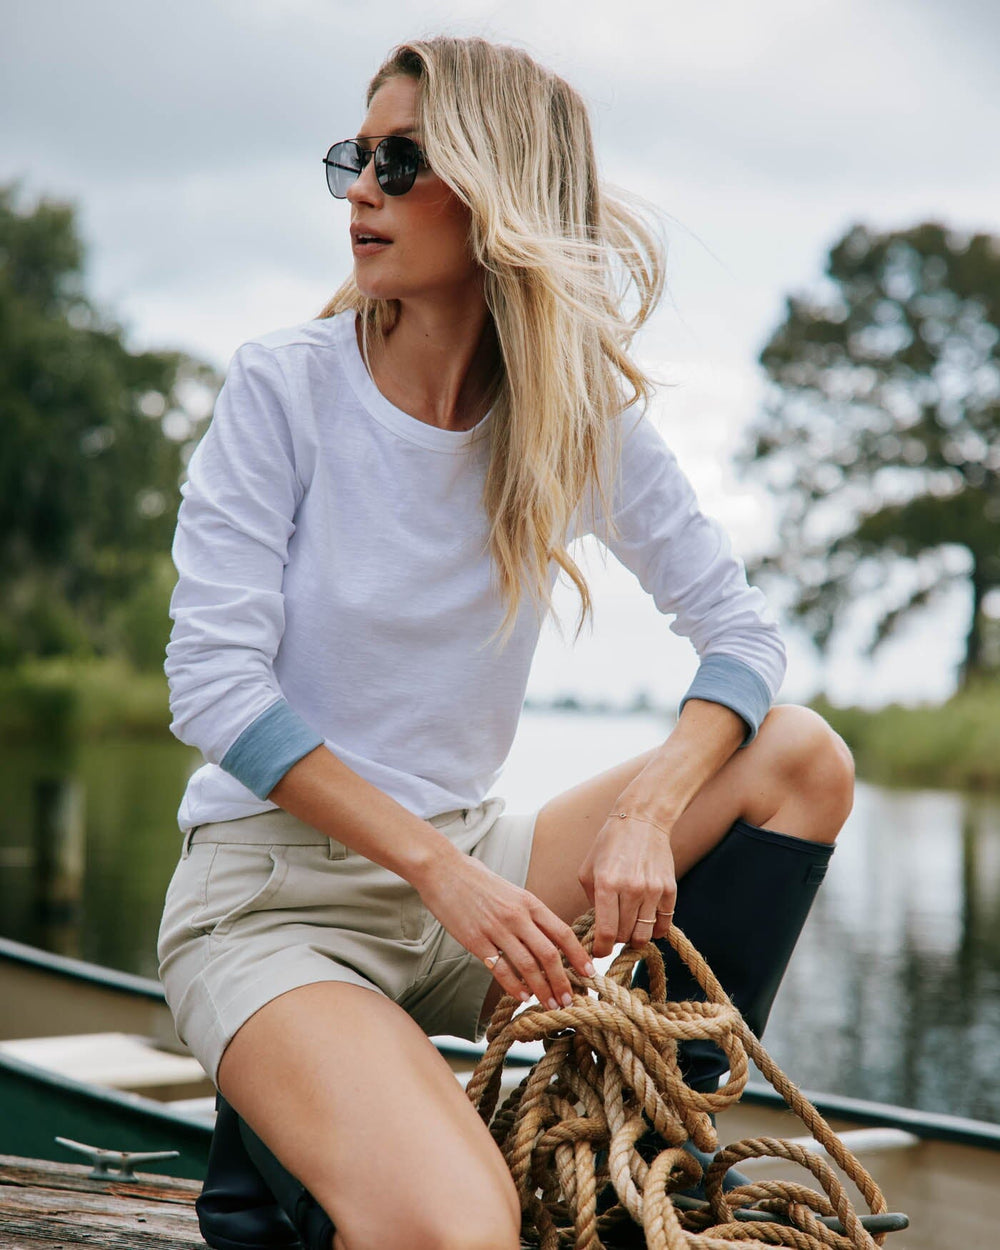 The front view of the Southern Tide Kimmy Crew Neck Long Sleeve T-Shirt by Southern Tide - Classic White